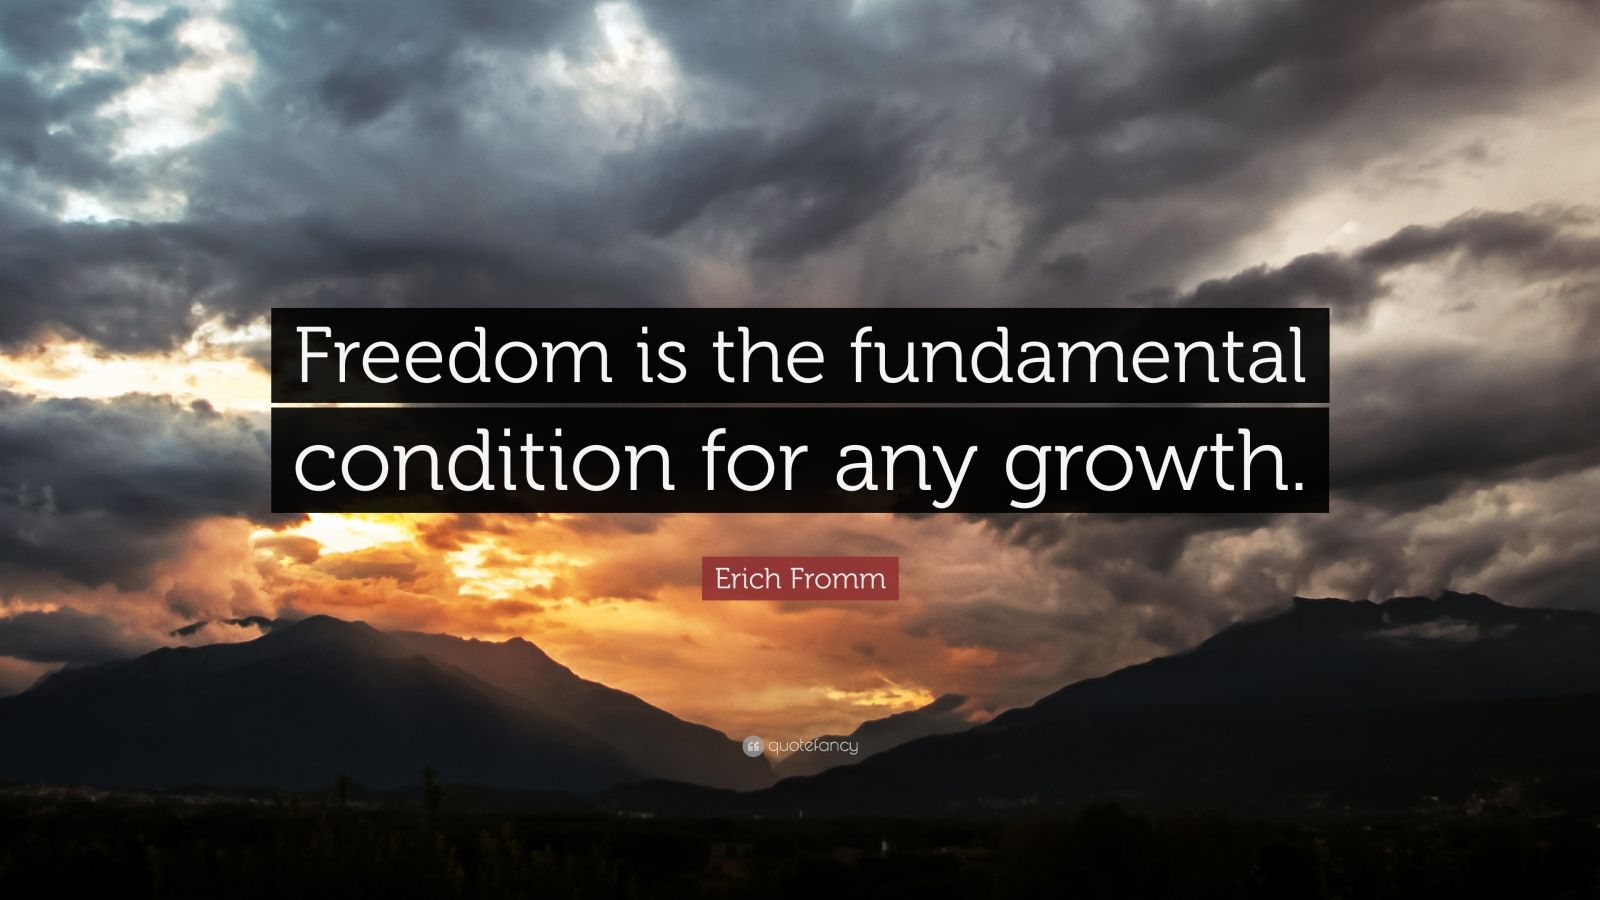 Erich Fromm Quote: "Freedom is the fundamental condition ...